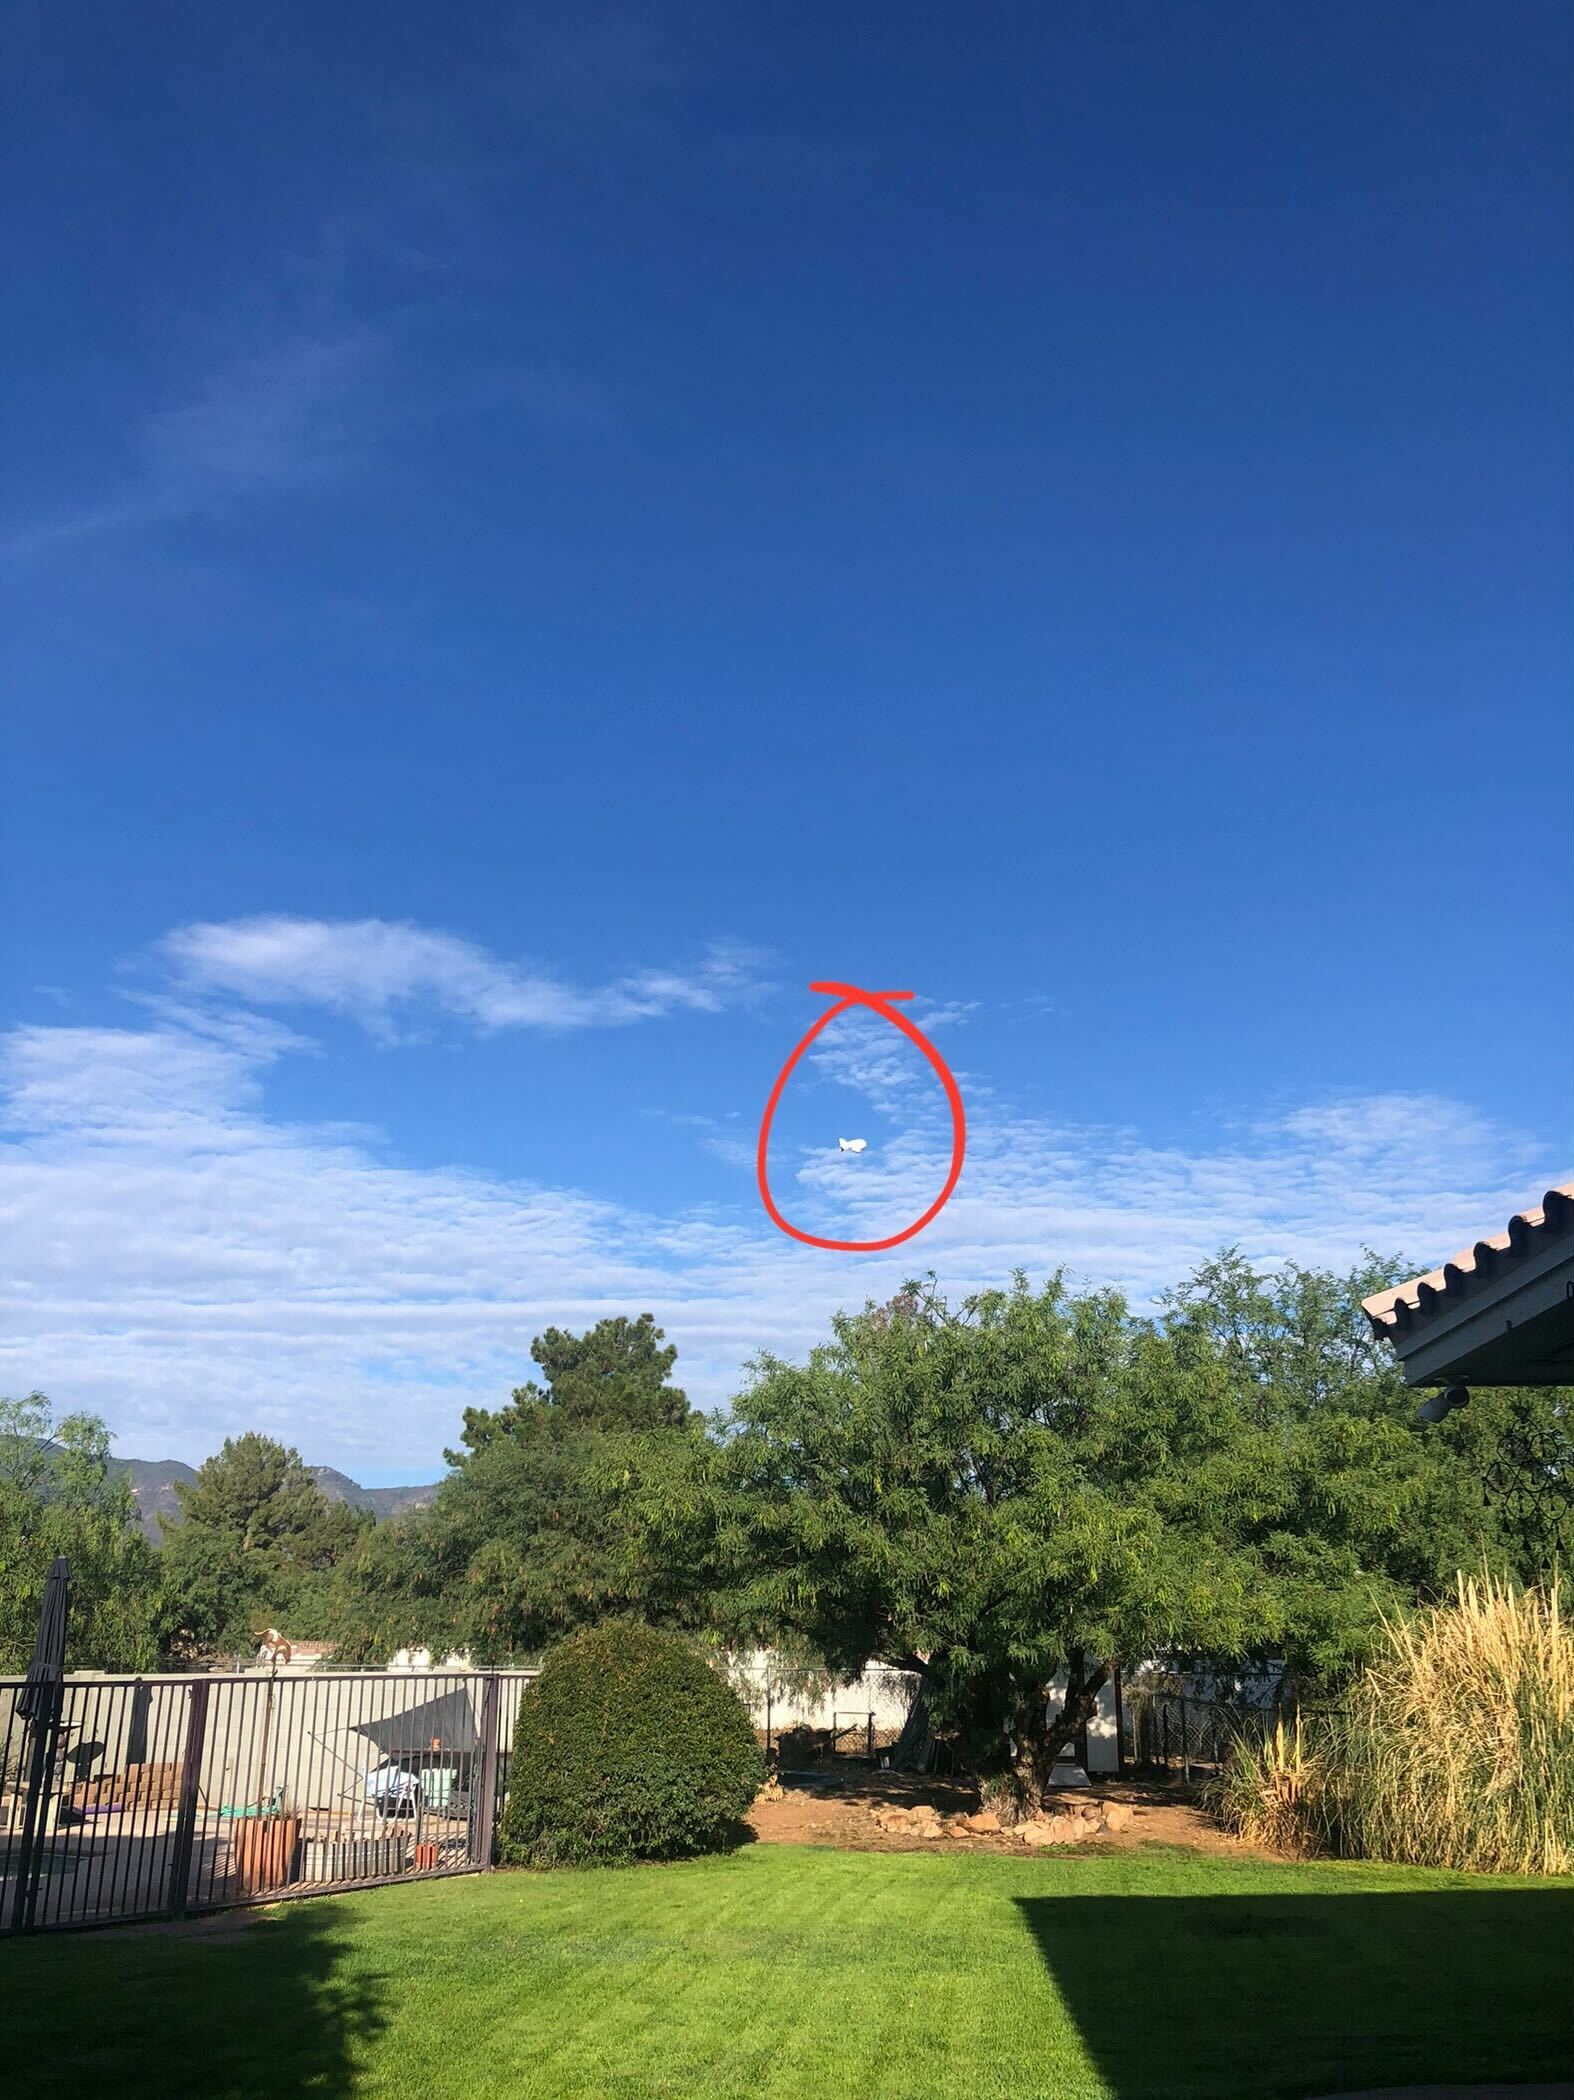 The surveillance blimp (TARS) as seen from my parents' back yard